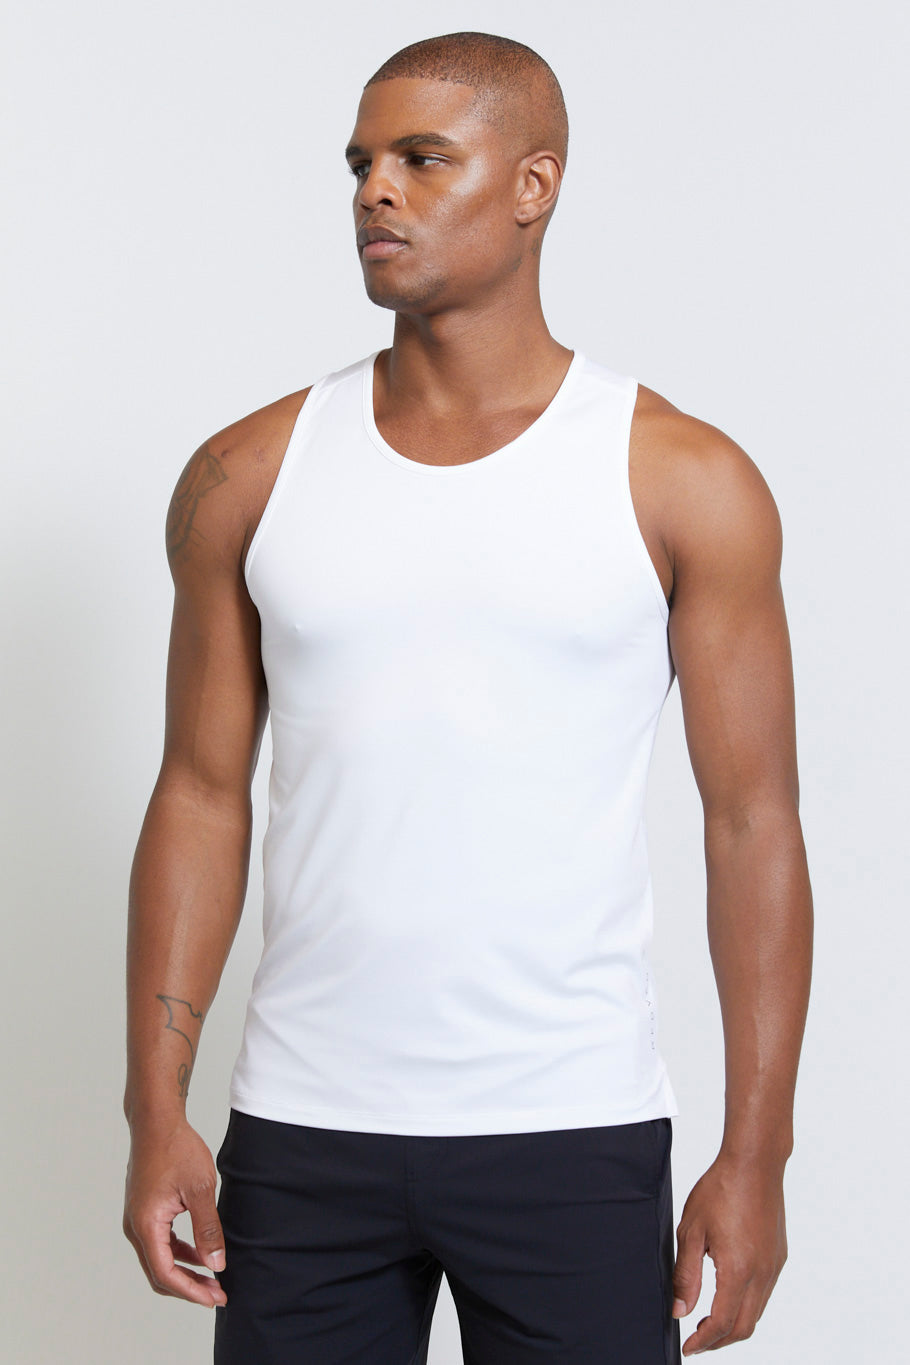 Image of the meyer tank in bright white